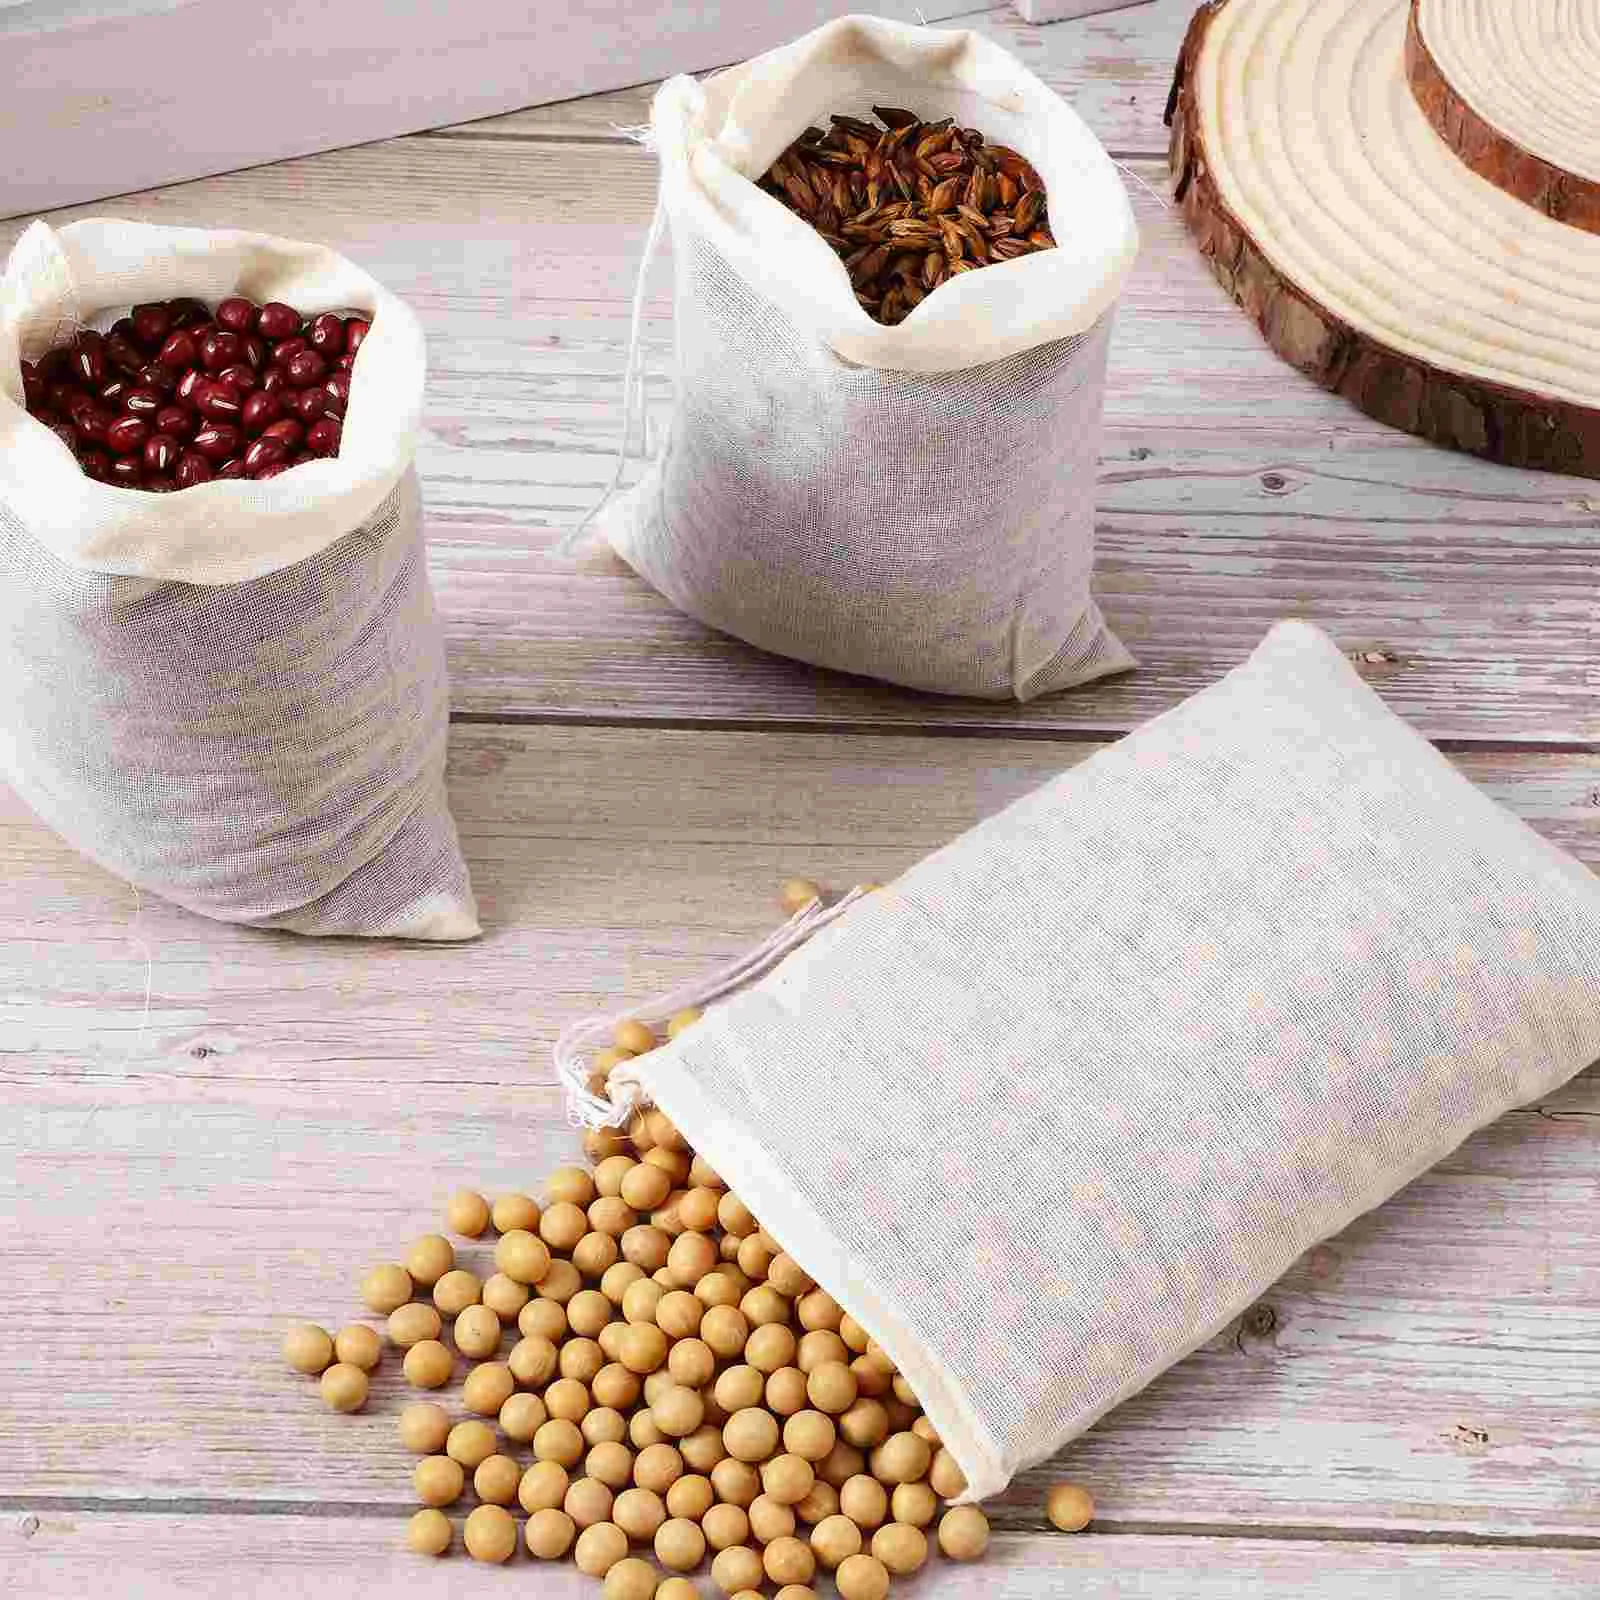 50 Pcs Traditional Chinese Medicine Bag Small Pouches Decoction